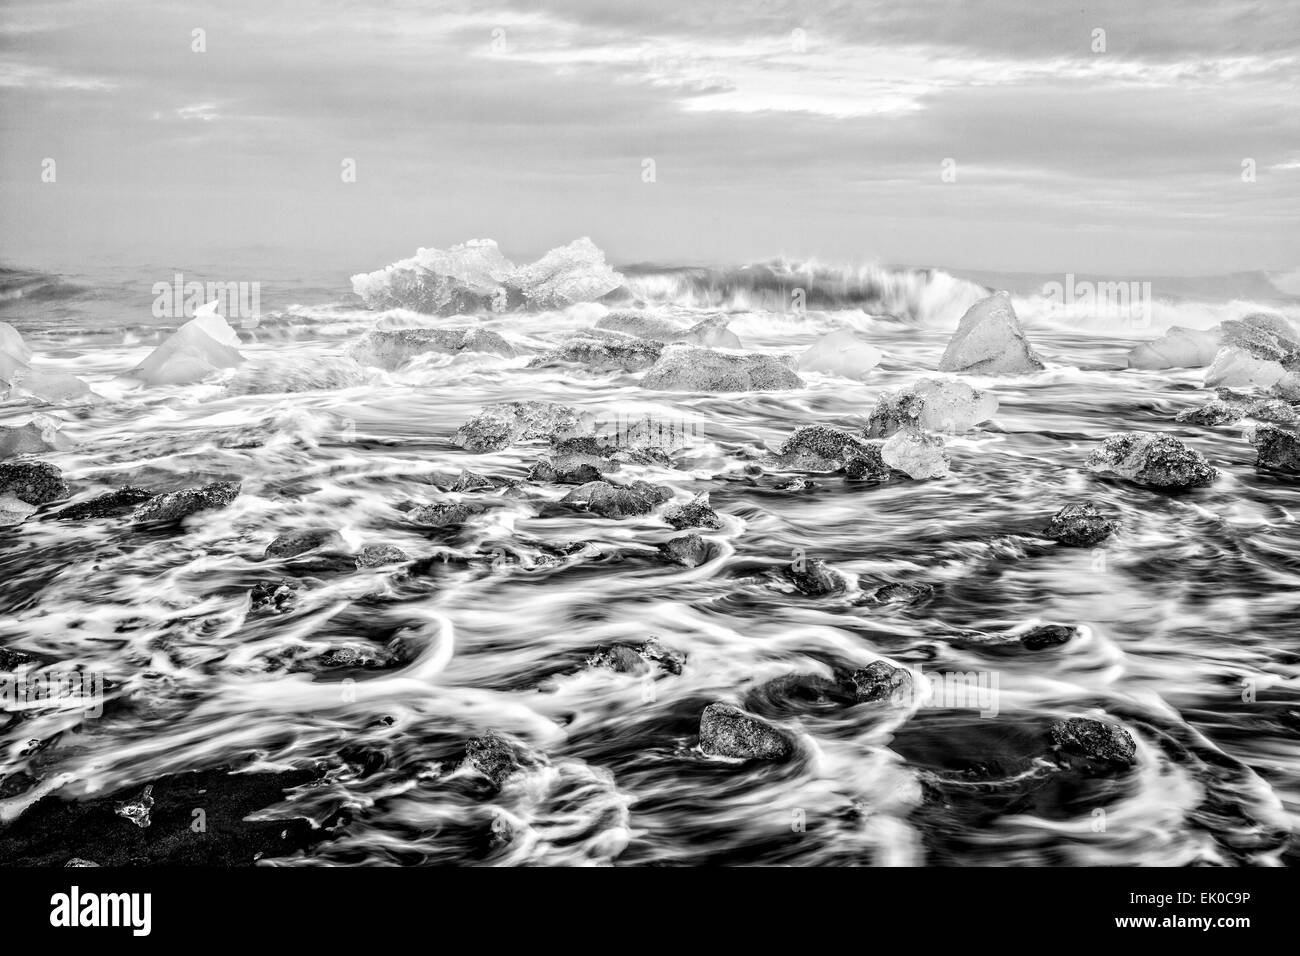 View of chunks of icebergs and ocean surf on the black sand beach in Jokulsarlon, Iceland Stock Photo